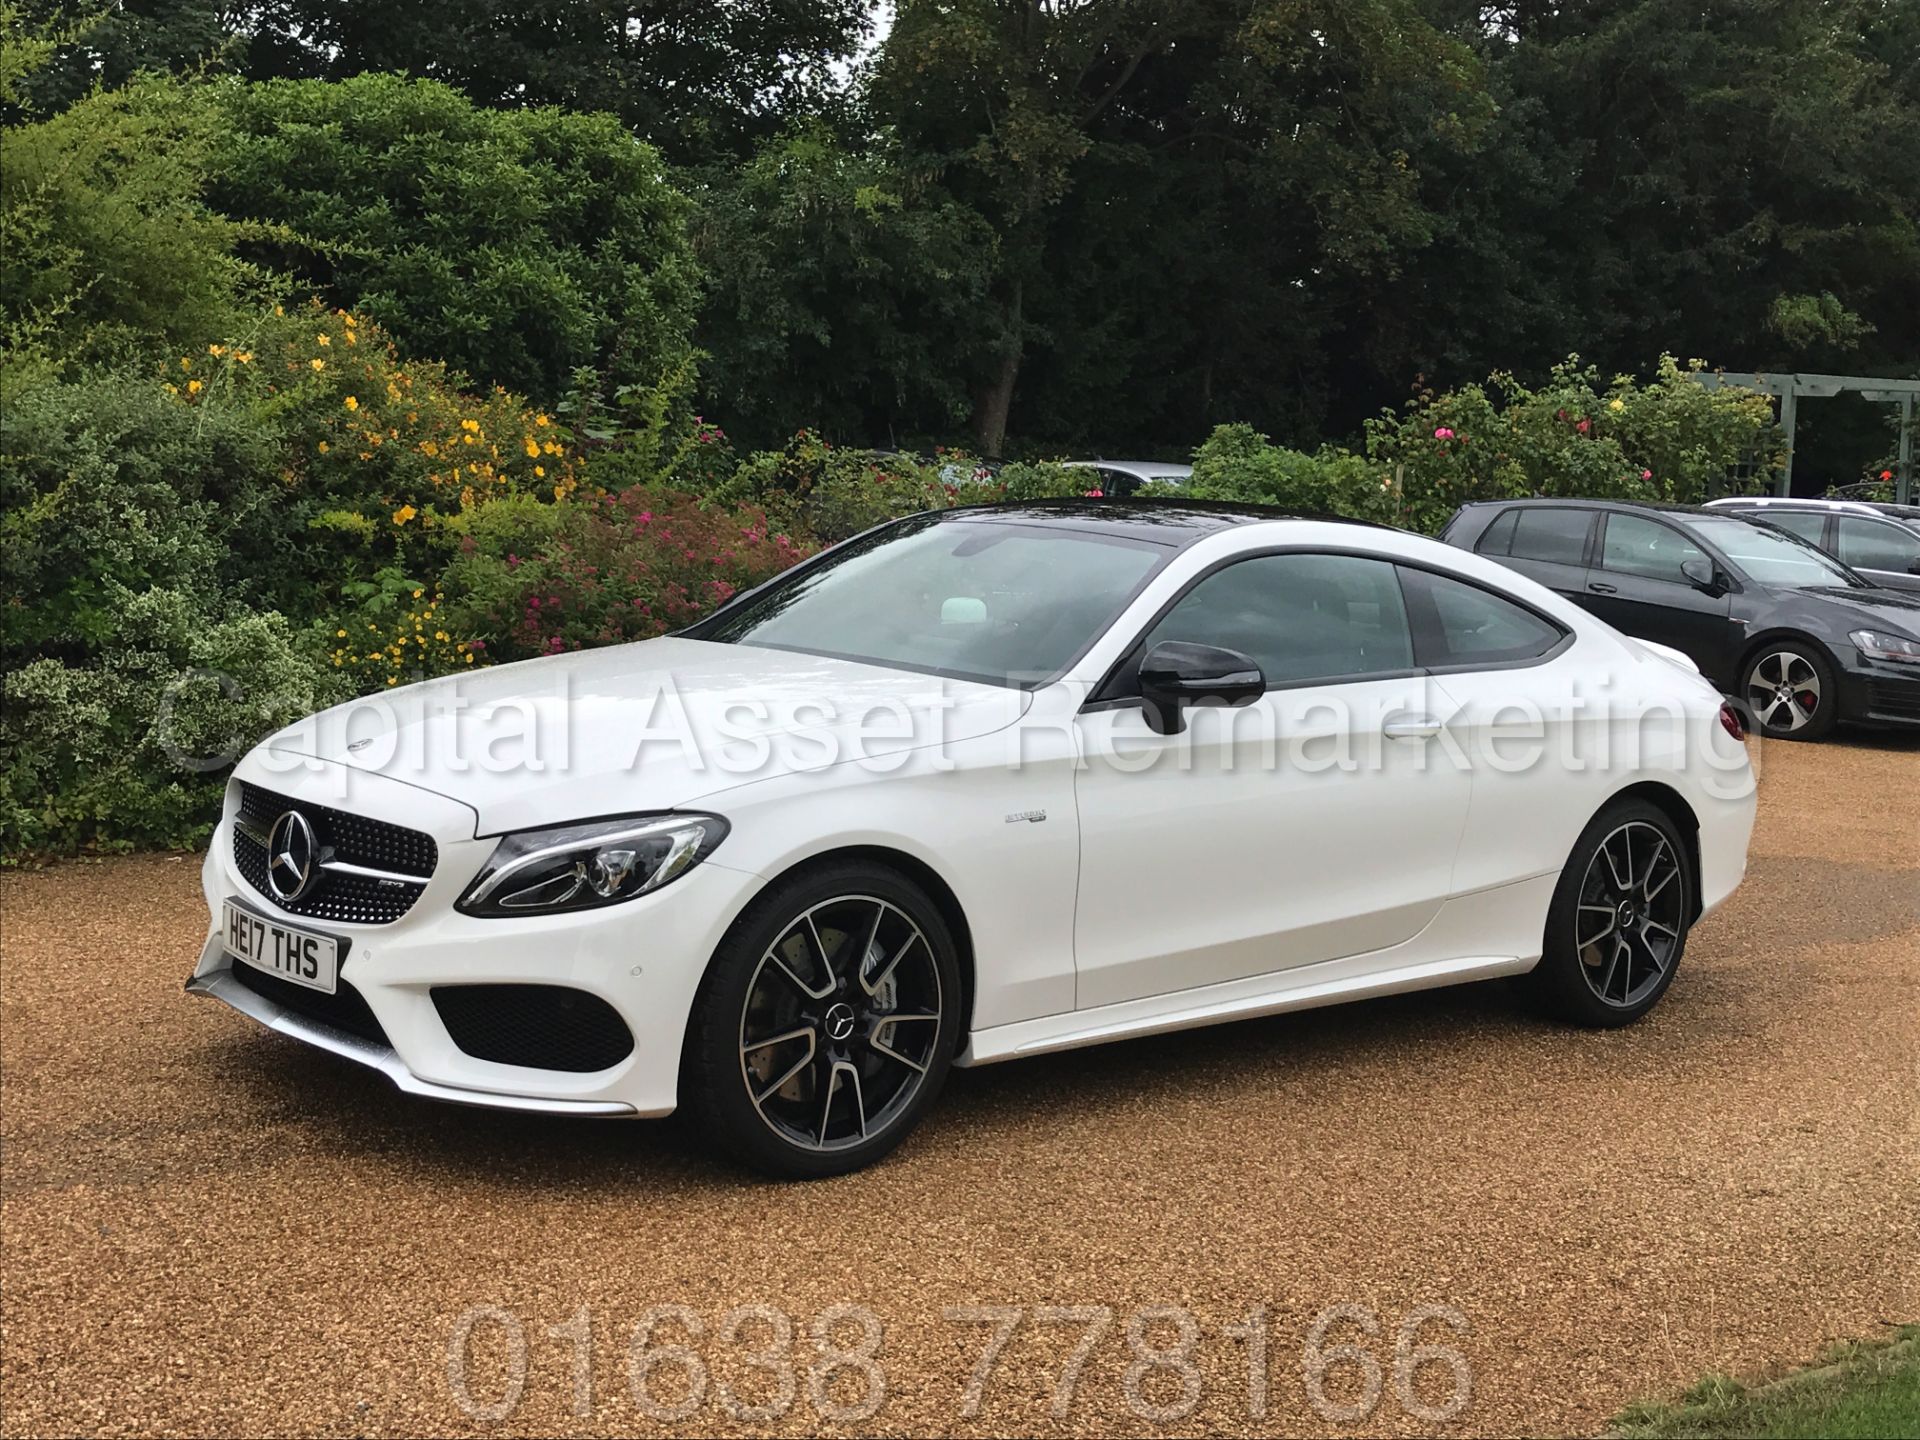 MEREDES-BENZ C43 AMG PREMIUM '4 MATIC' COUPE (2017) '9-G AUTO - LEATHER - SAT NAV' **FULLY LOADED** - Image 9 of 57